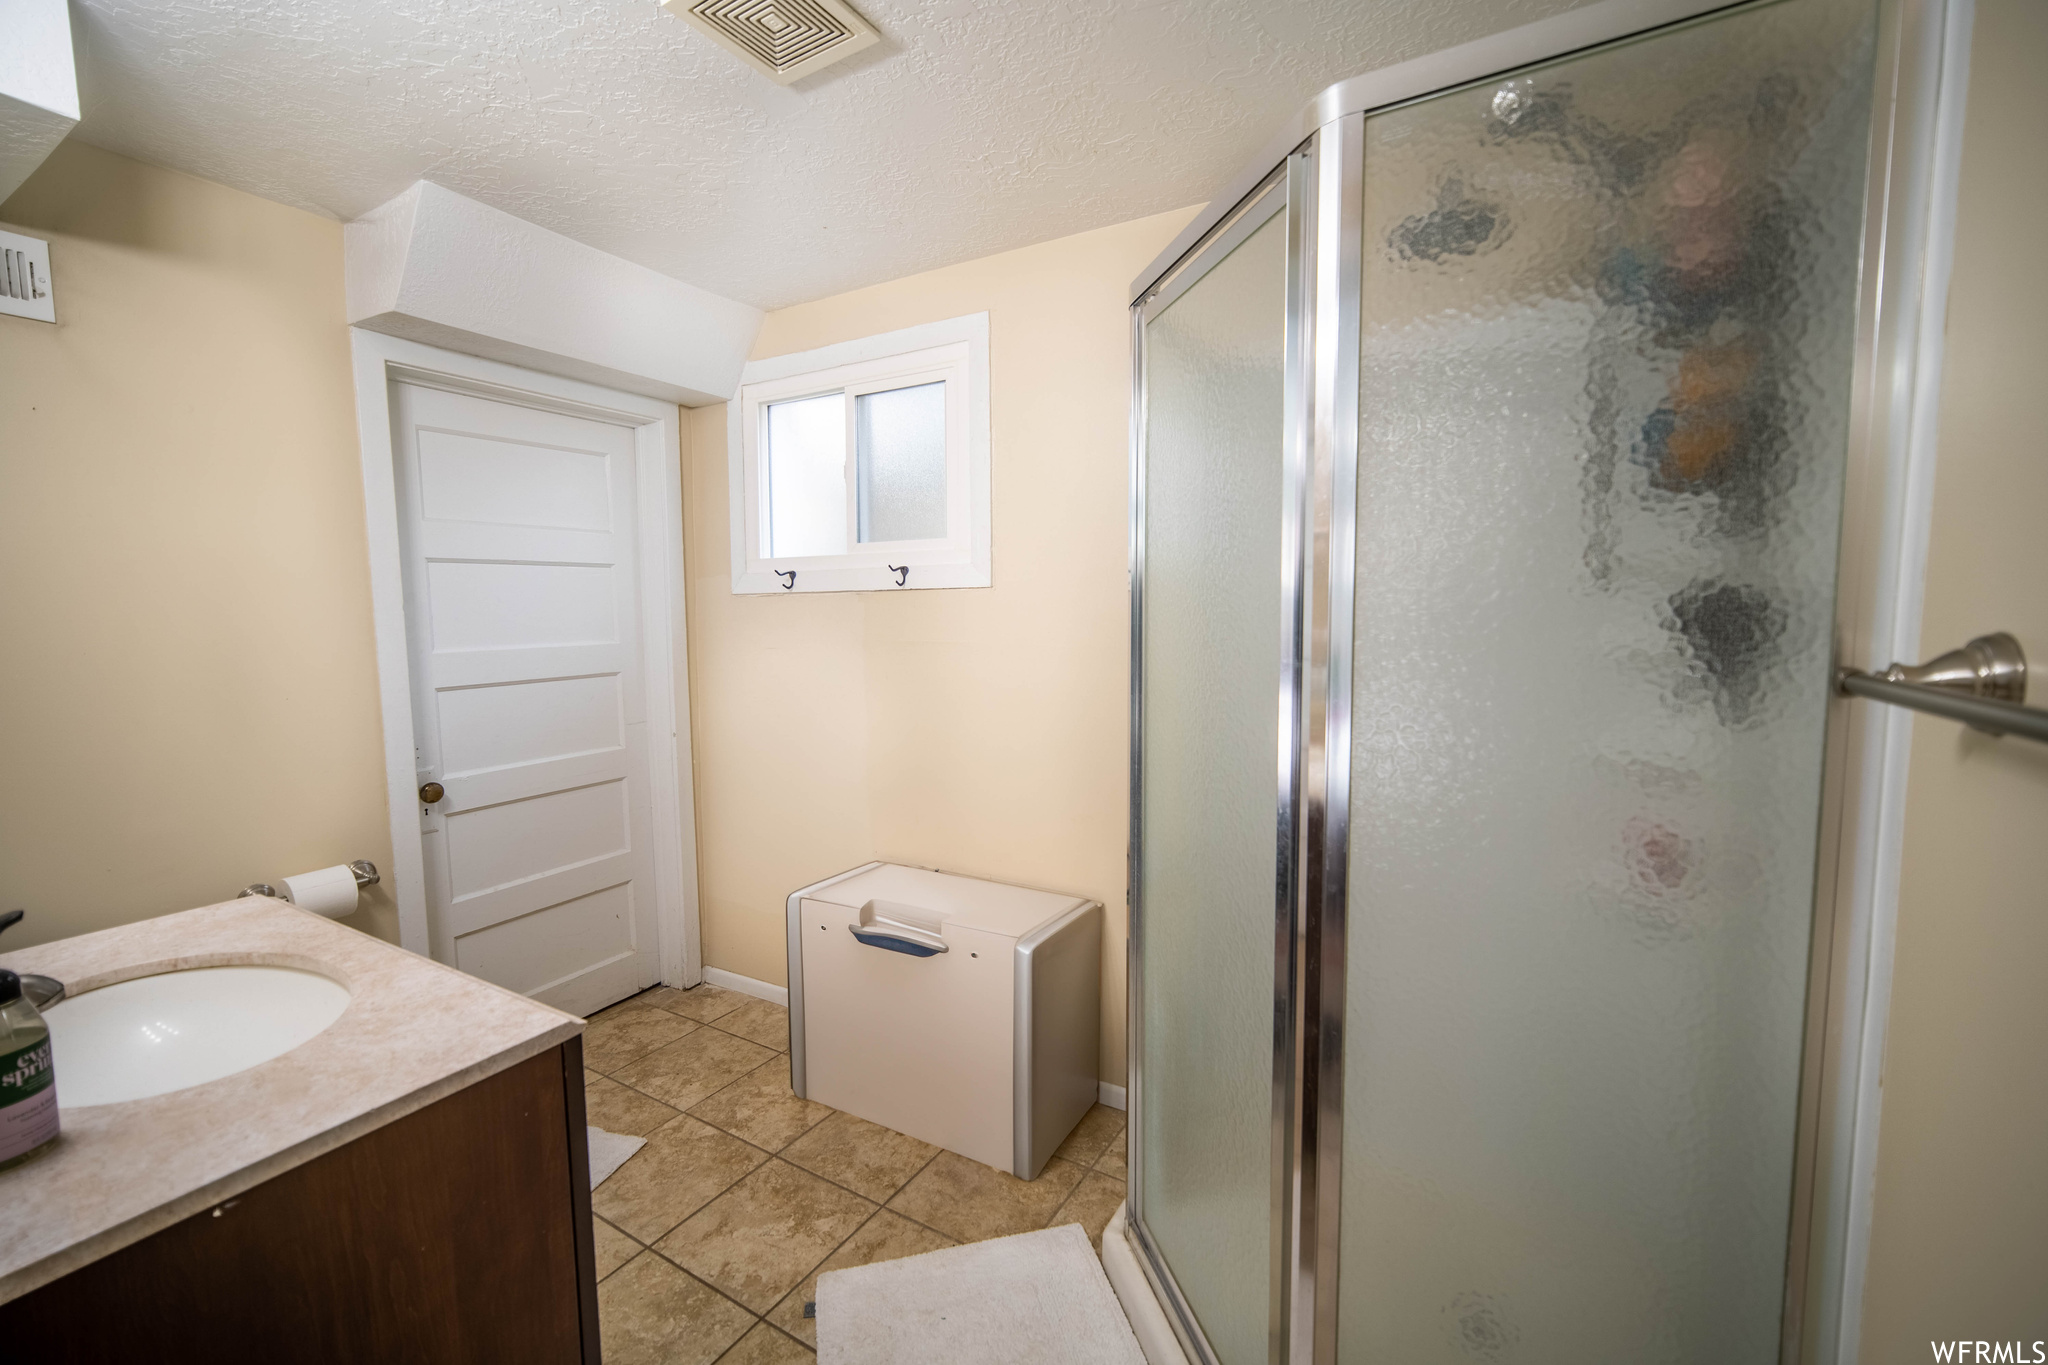 Bathroom with a textured ceiling, vanity, a shower with door, and tile floors